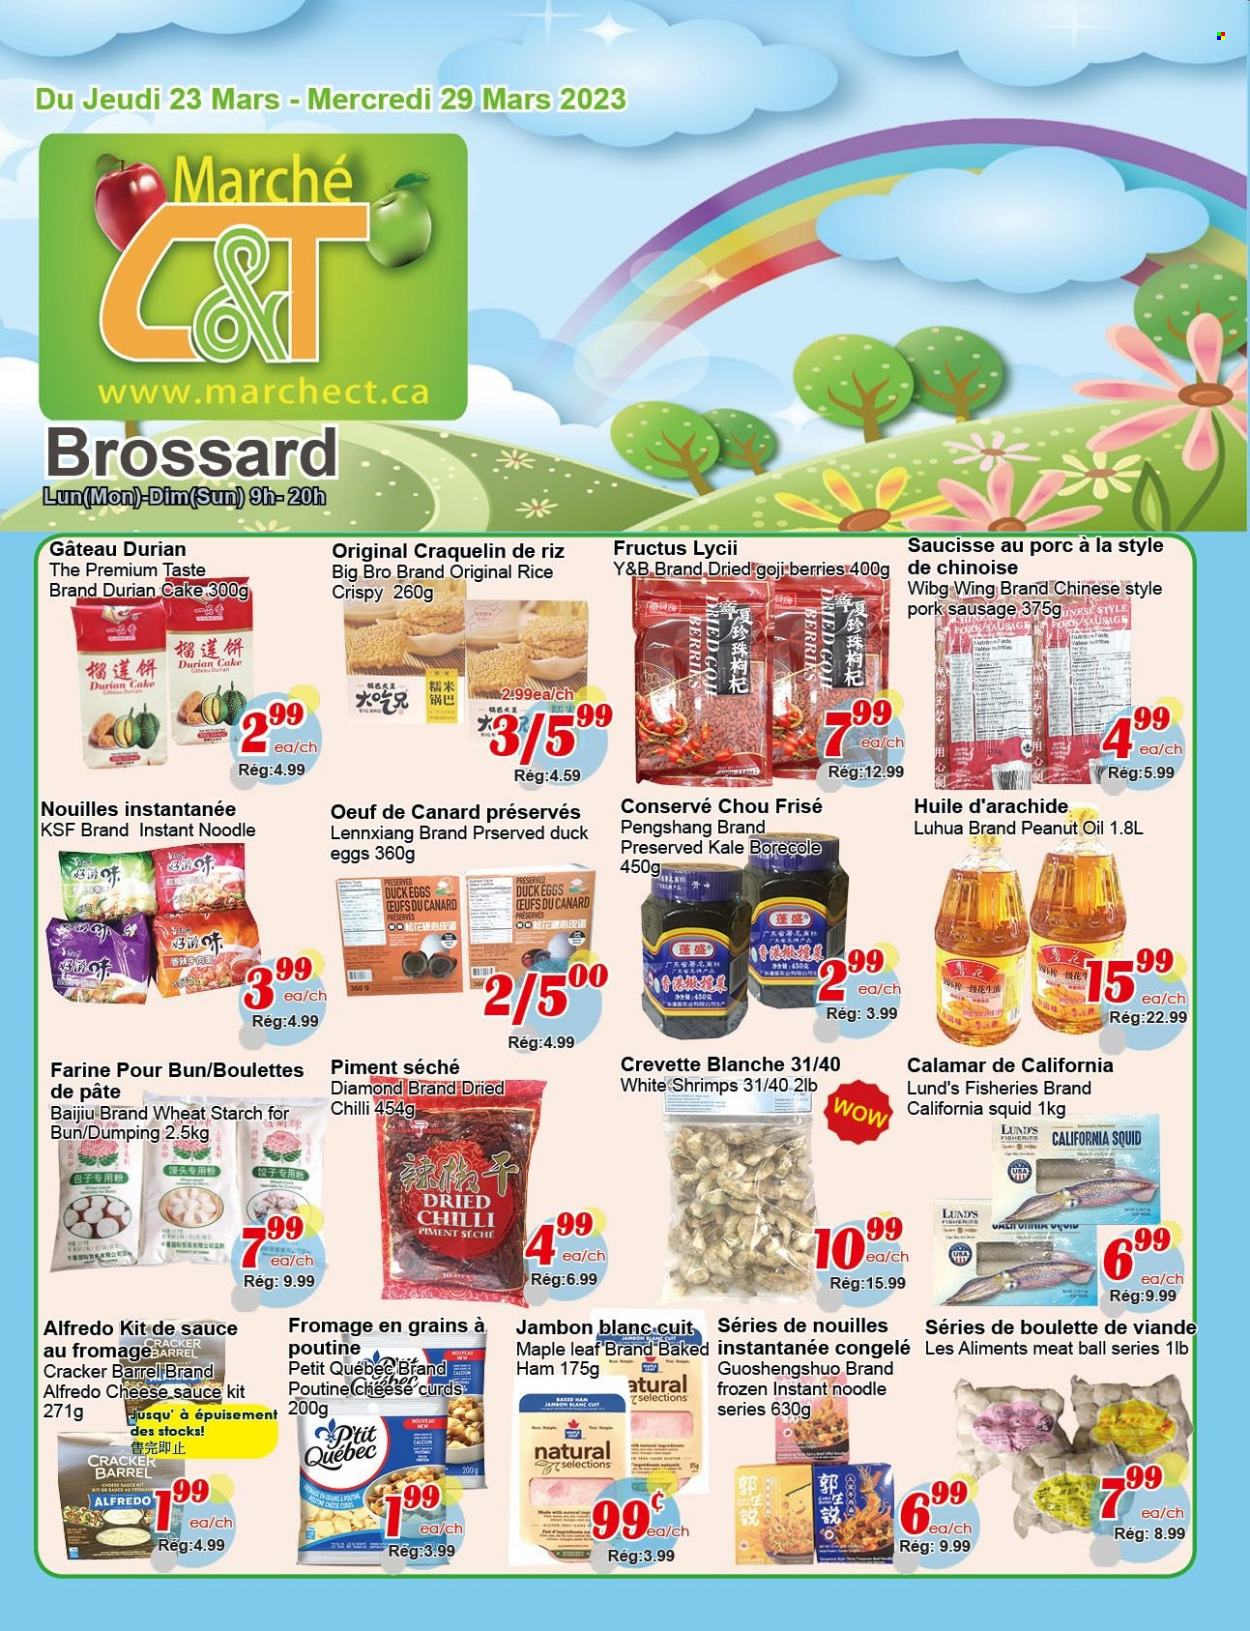 thumbnail - Marché C&T Flyer - March 23, 2023 - March 29, 2023 - Sales products - cake, kale, squid, shrimps, sauce, noodles, ham, sausage, pork sausage, cheese, cheese curd, Mars, crackers, starch, peanut oil, oil, goji. Page 1.